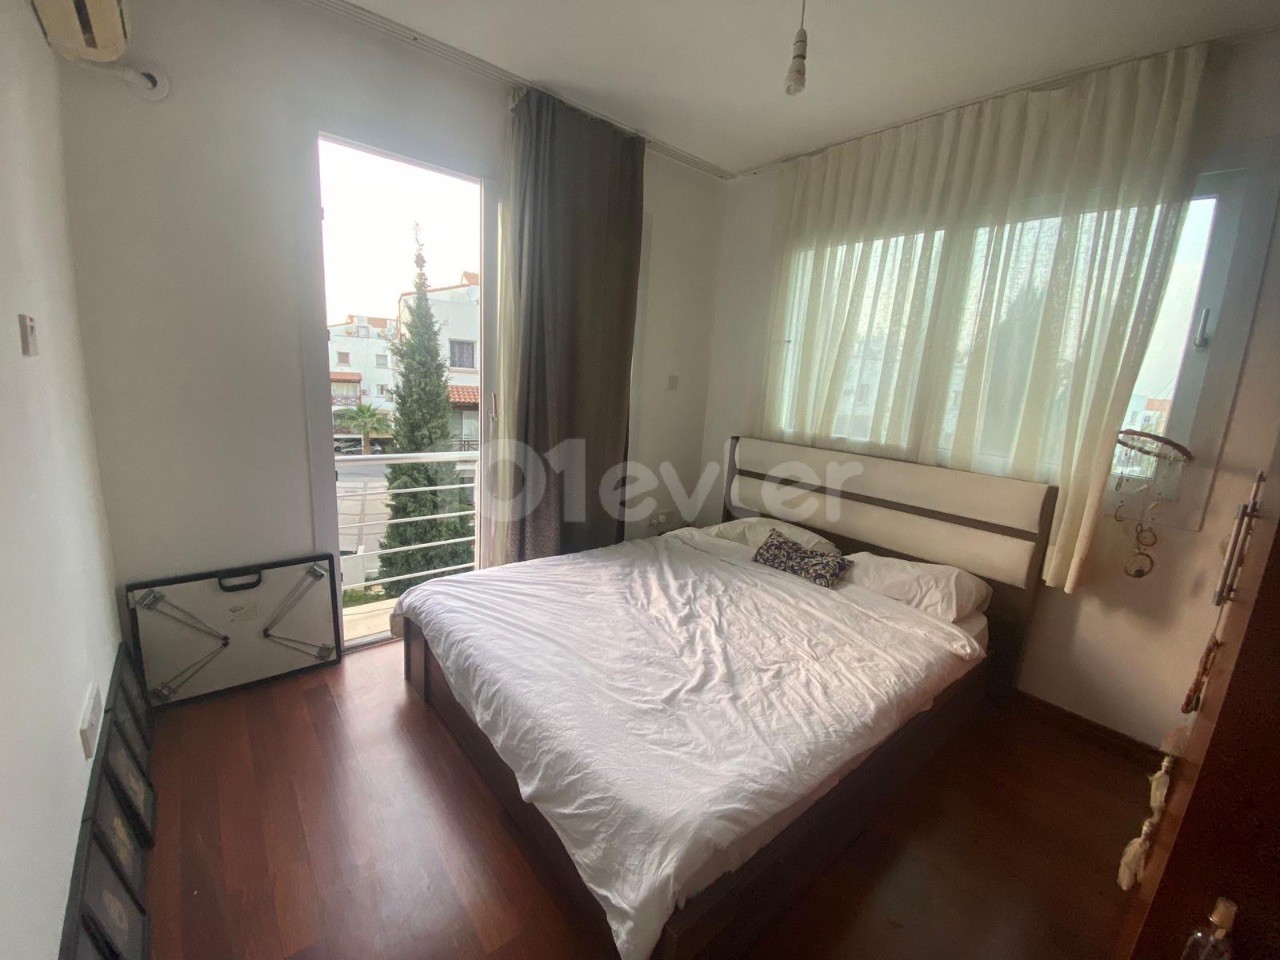 2+1 Flat for Rent in Kyrenia Center, near the old nusmar market